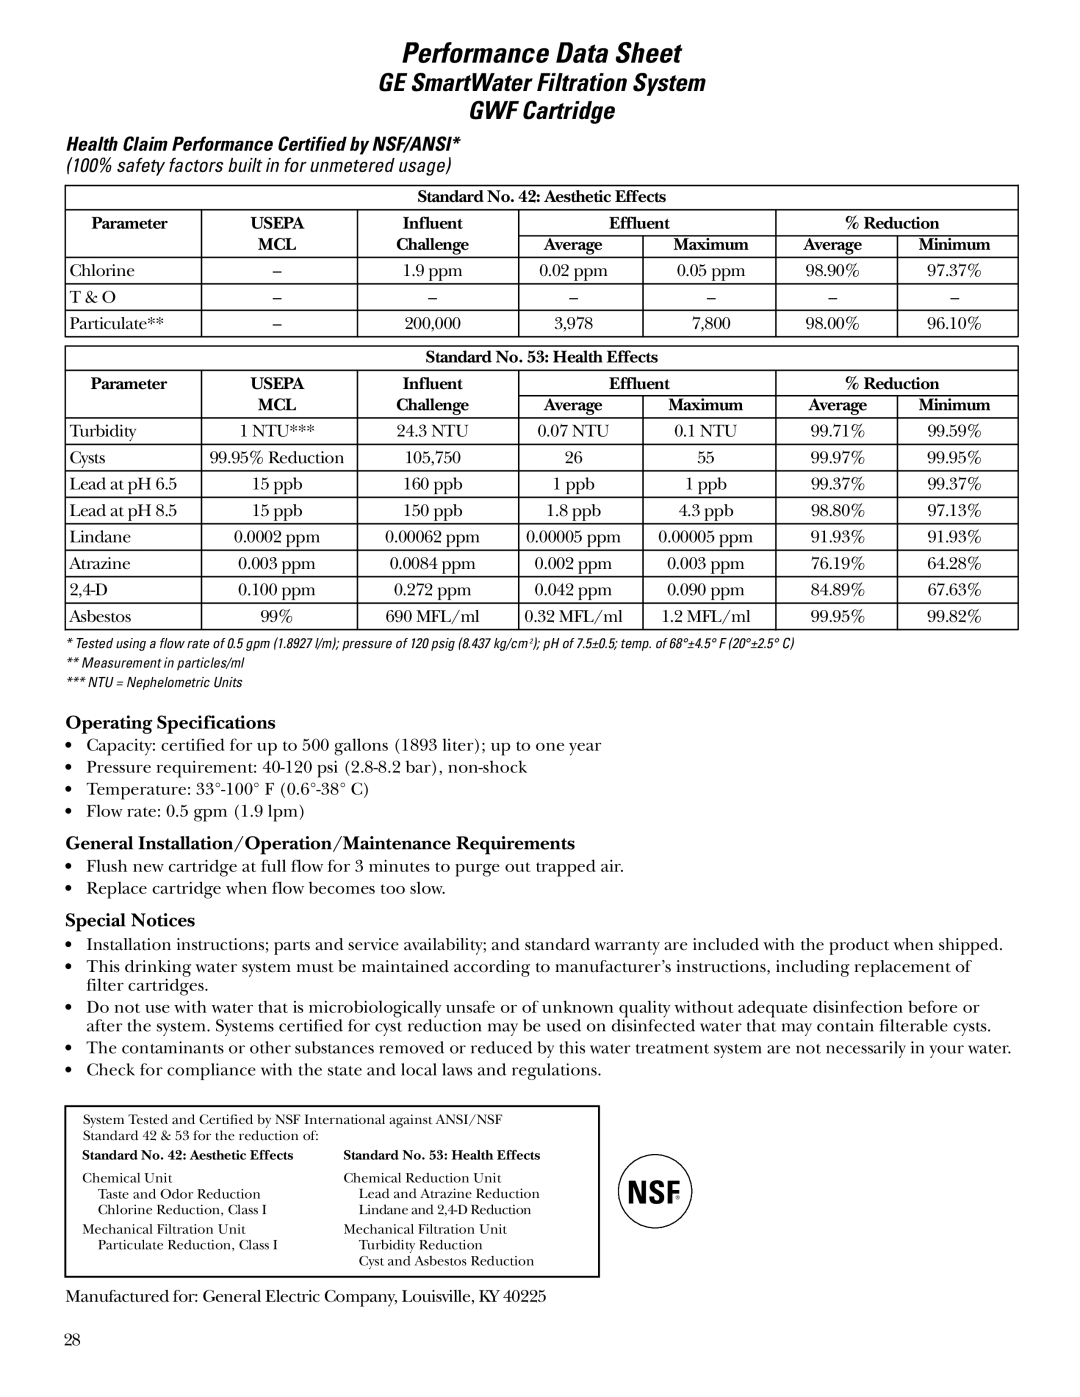 GE Monogram Refrigerator Performance Data Sheet, GE SmartWater Filtration System GWF Cartridge, Operating Specifications 